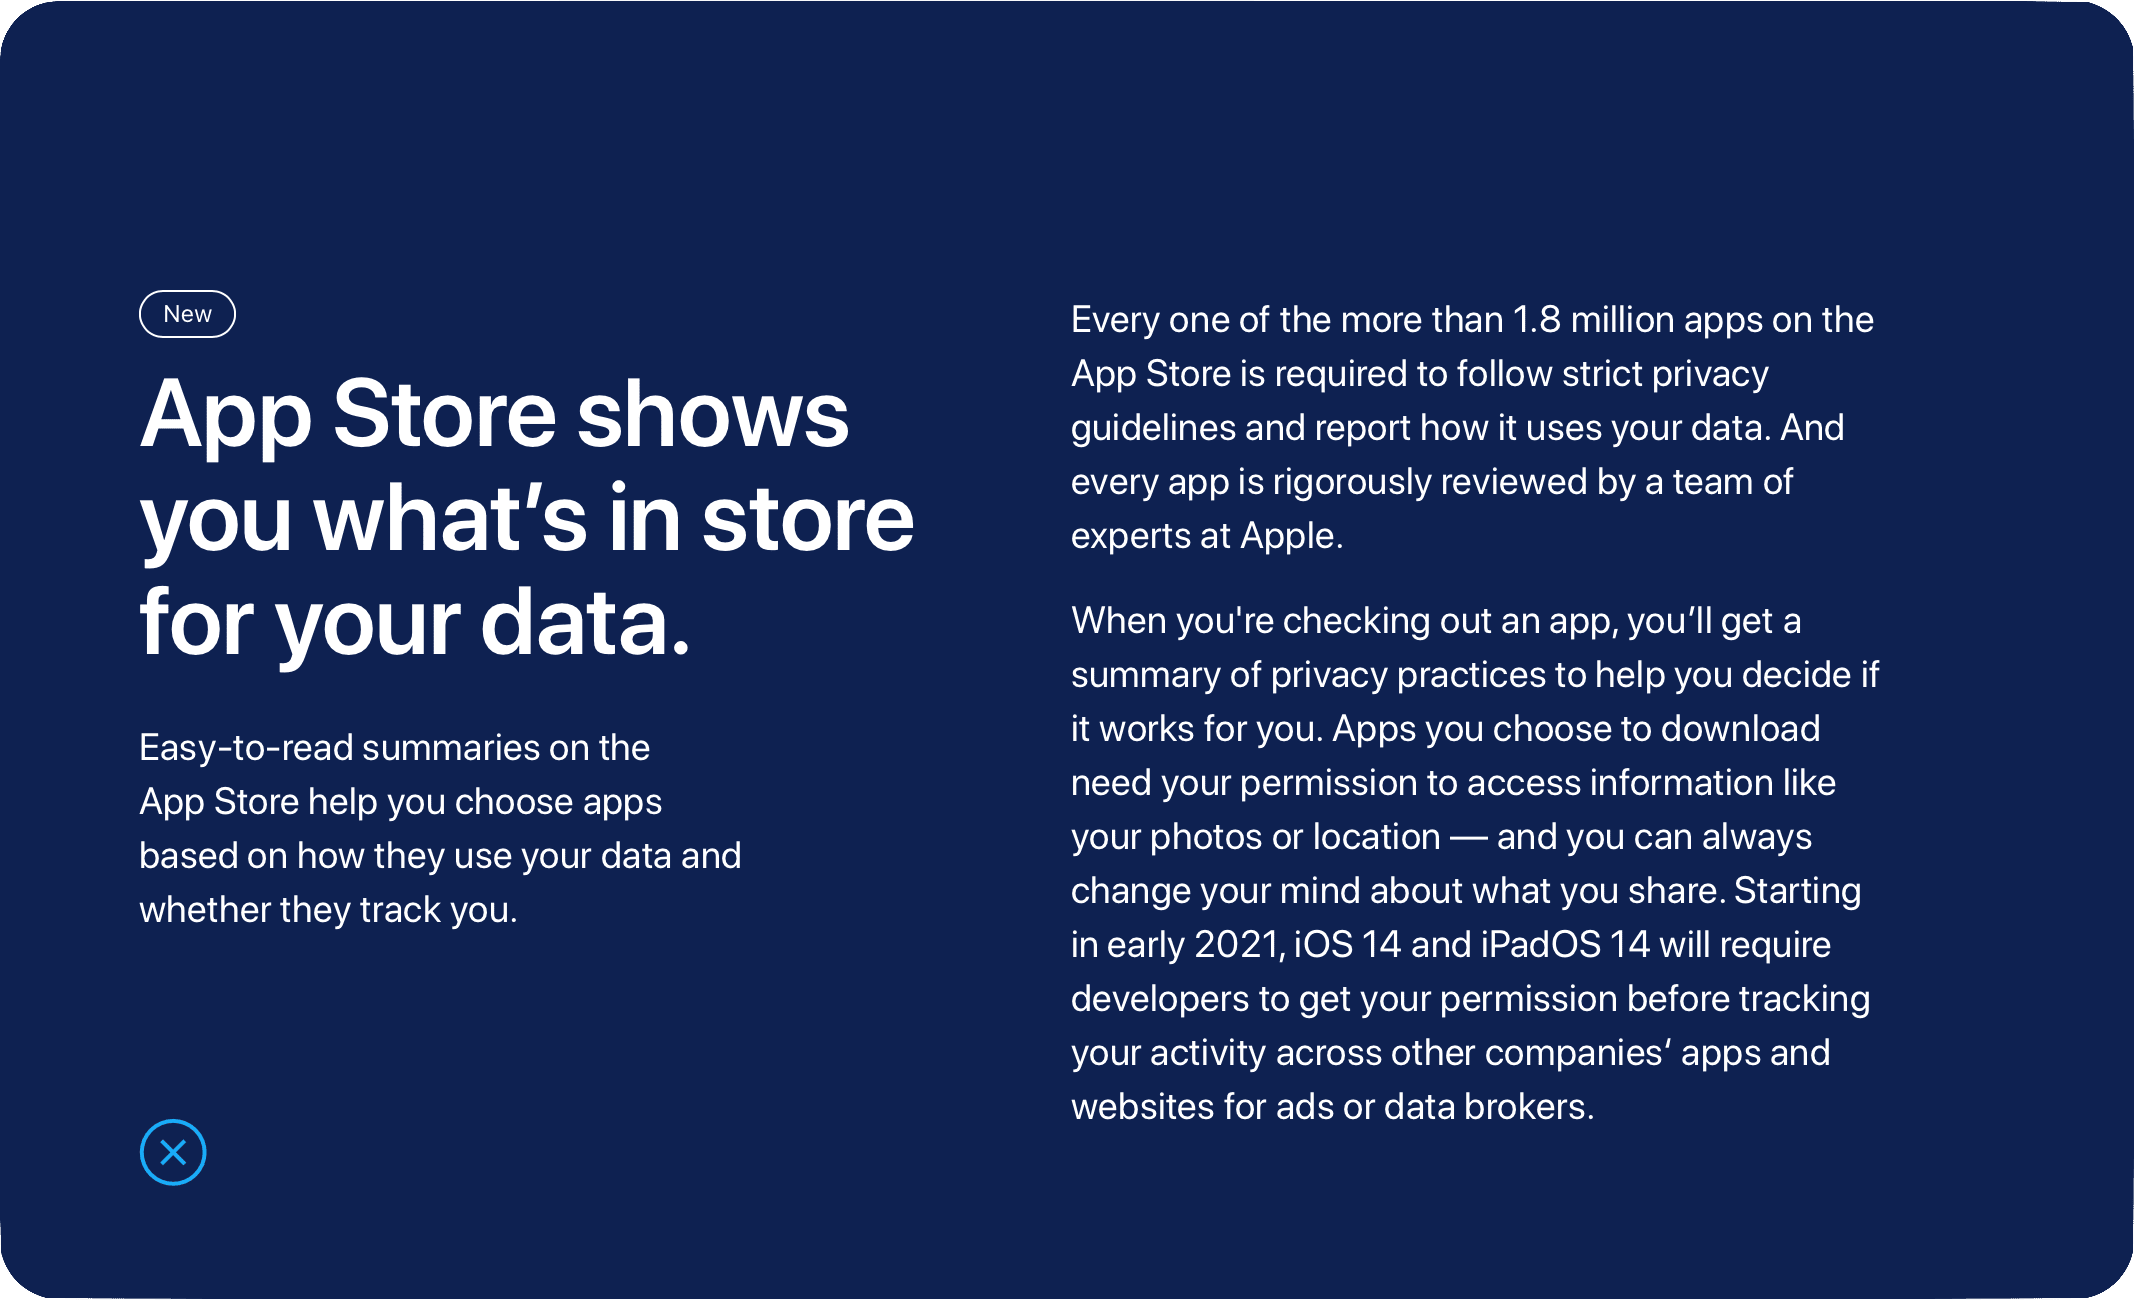 App Store shows you what’s in store for your data.